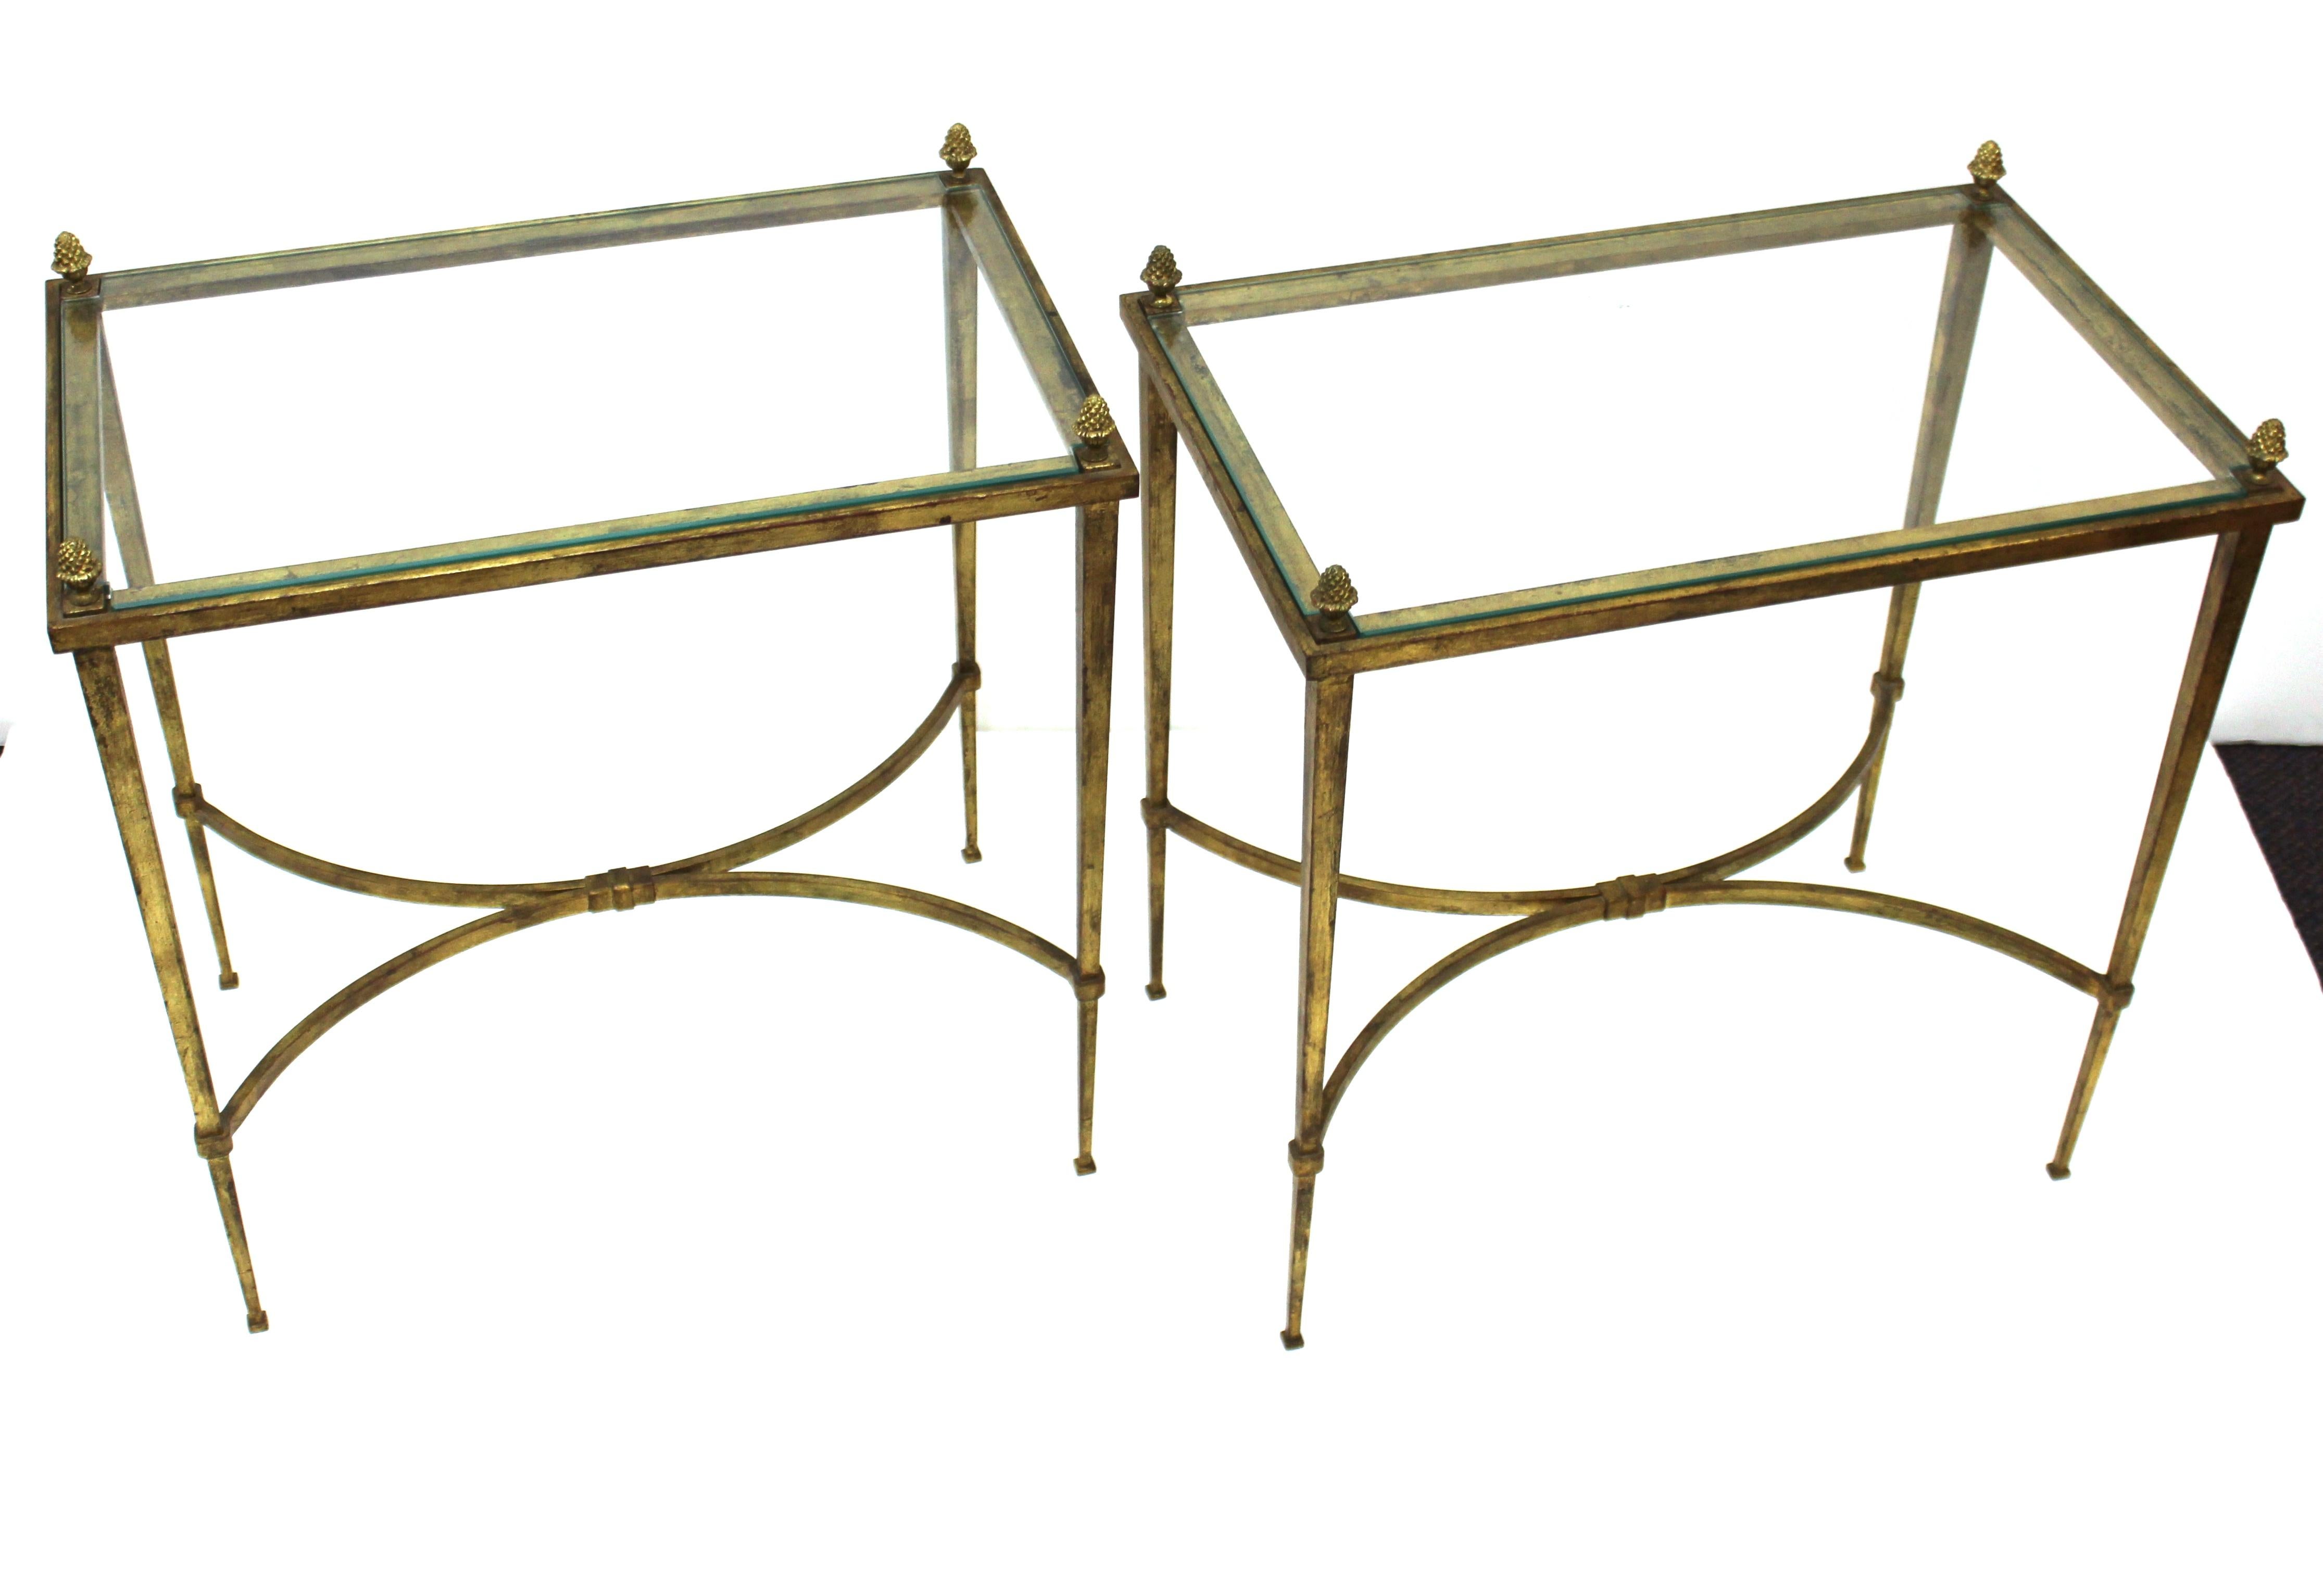 Hollywood Regency pair of end tables or side tables made by Maison Baguès in France during the mid-20th century. The pair is made of gilt bronze in a neoclassical inspired style and has rectangular glass tops and finials. In great vintage condition